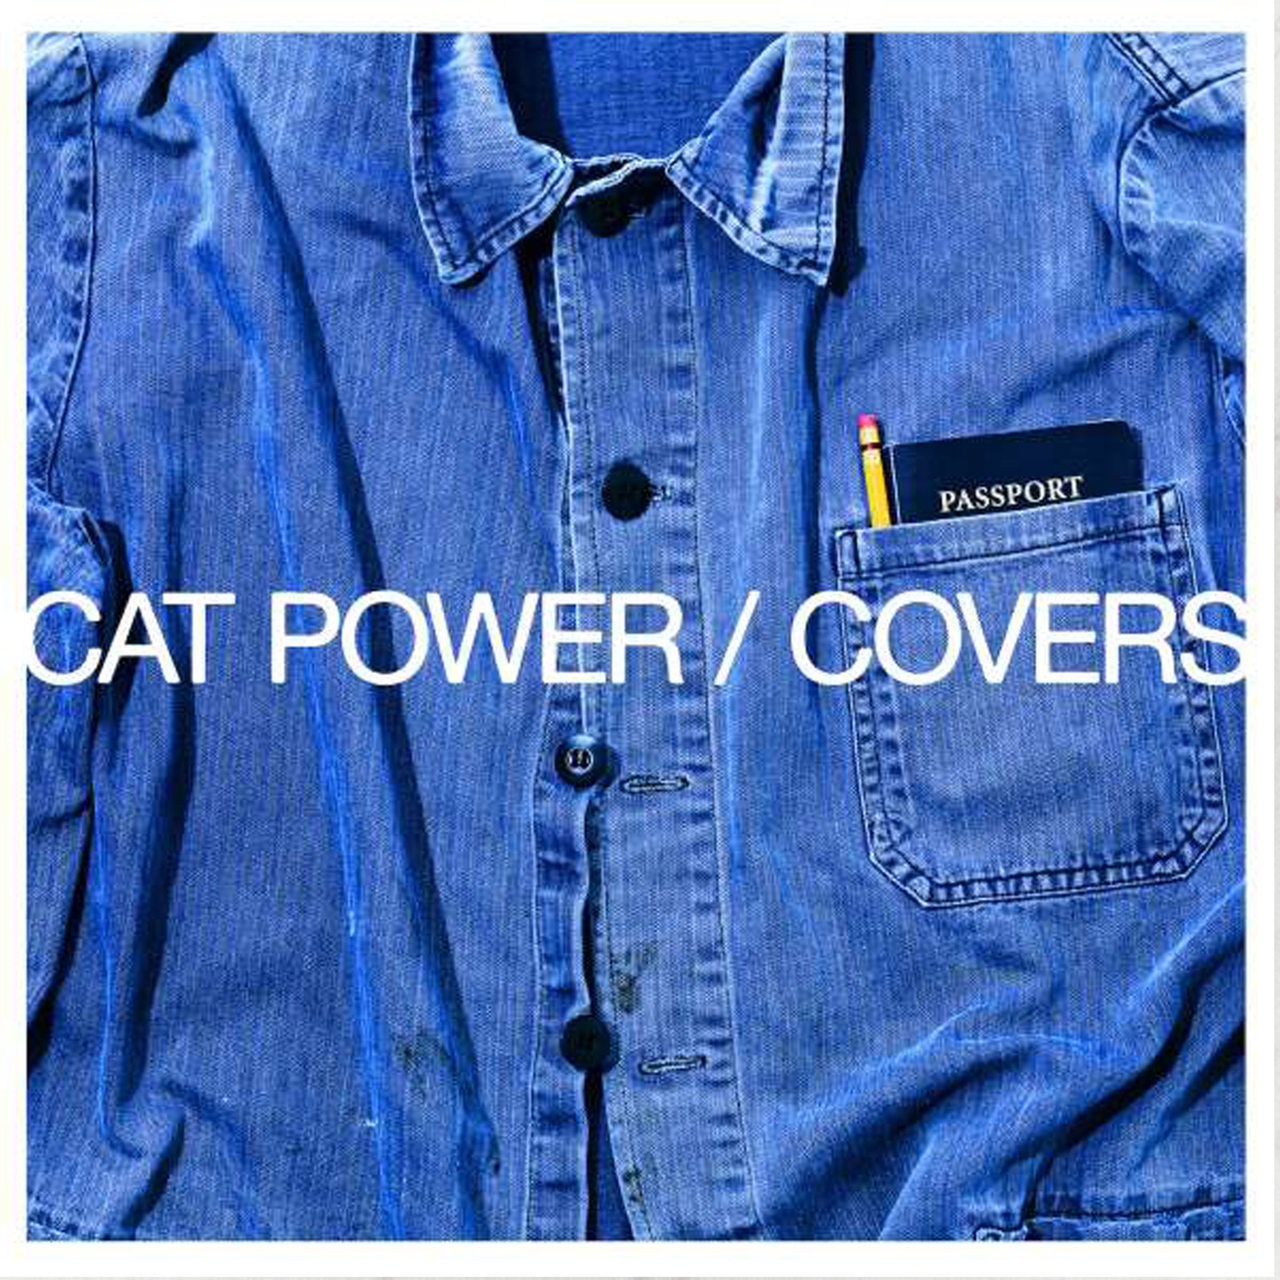 Albumcover Cat Power "Covers"